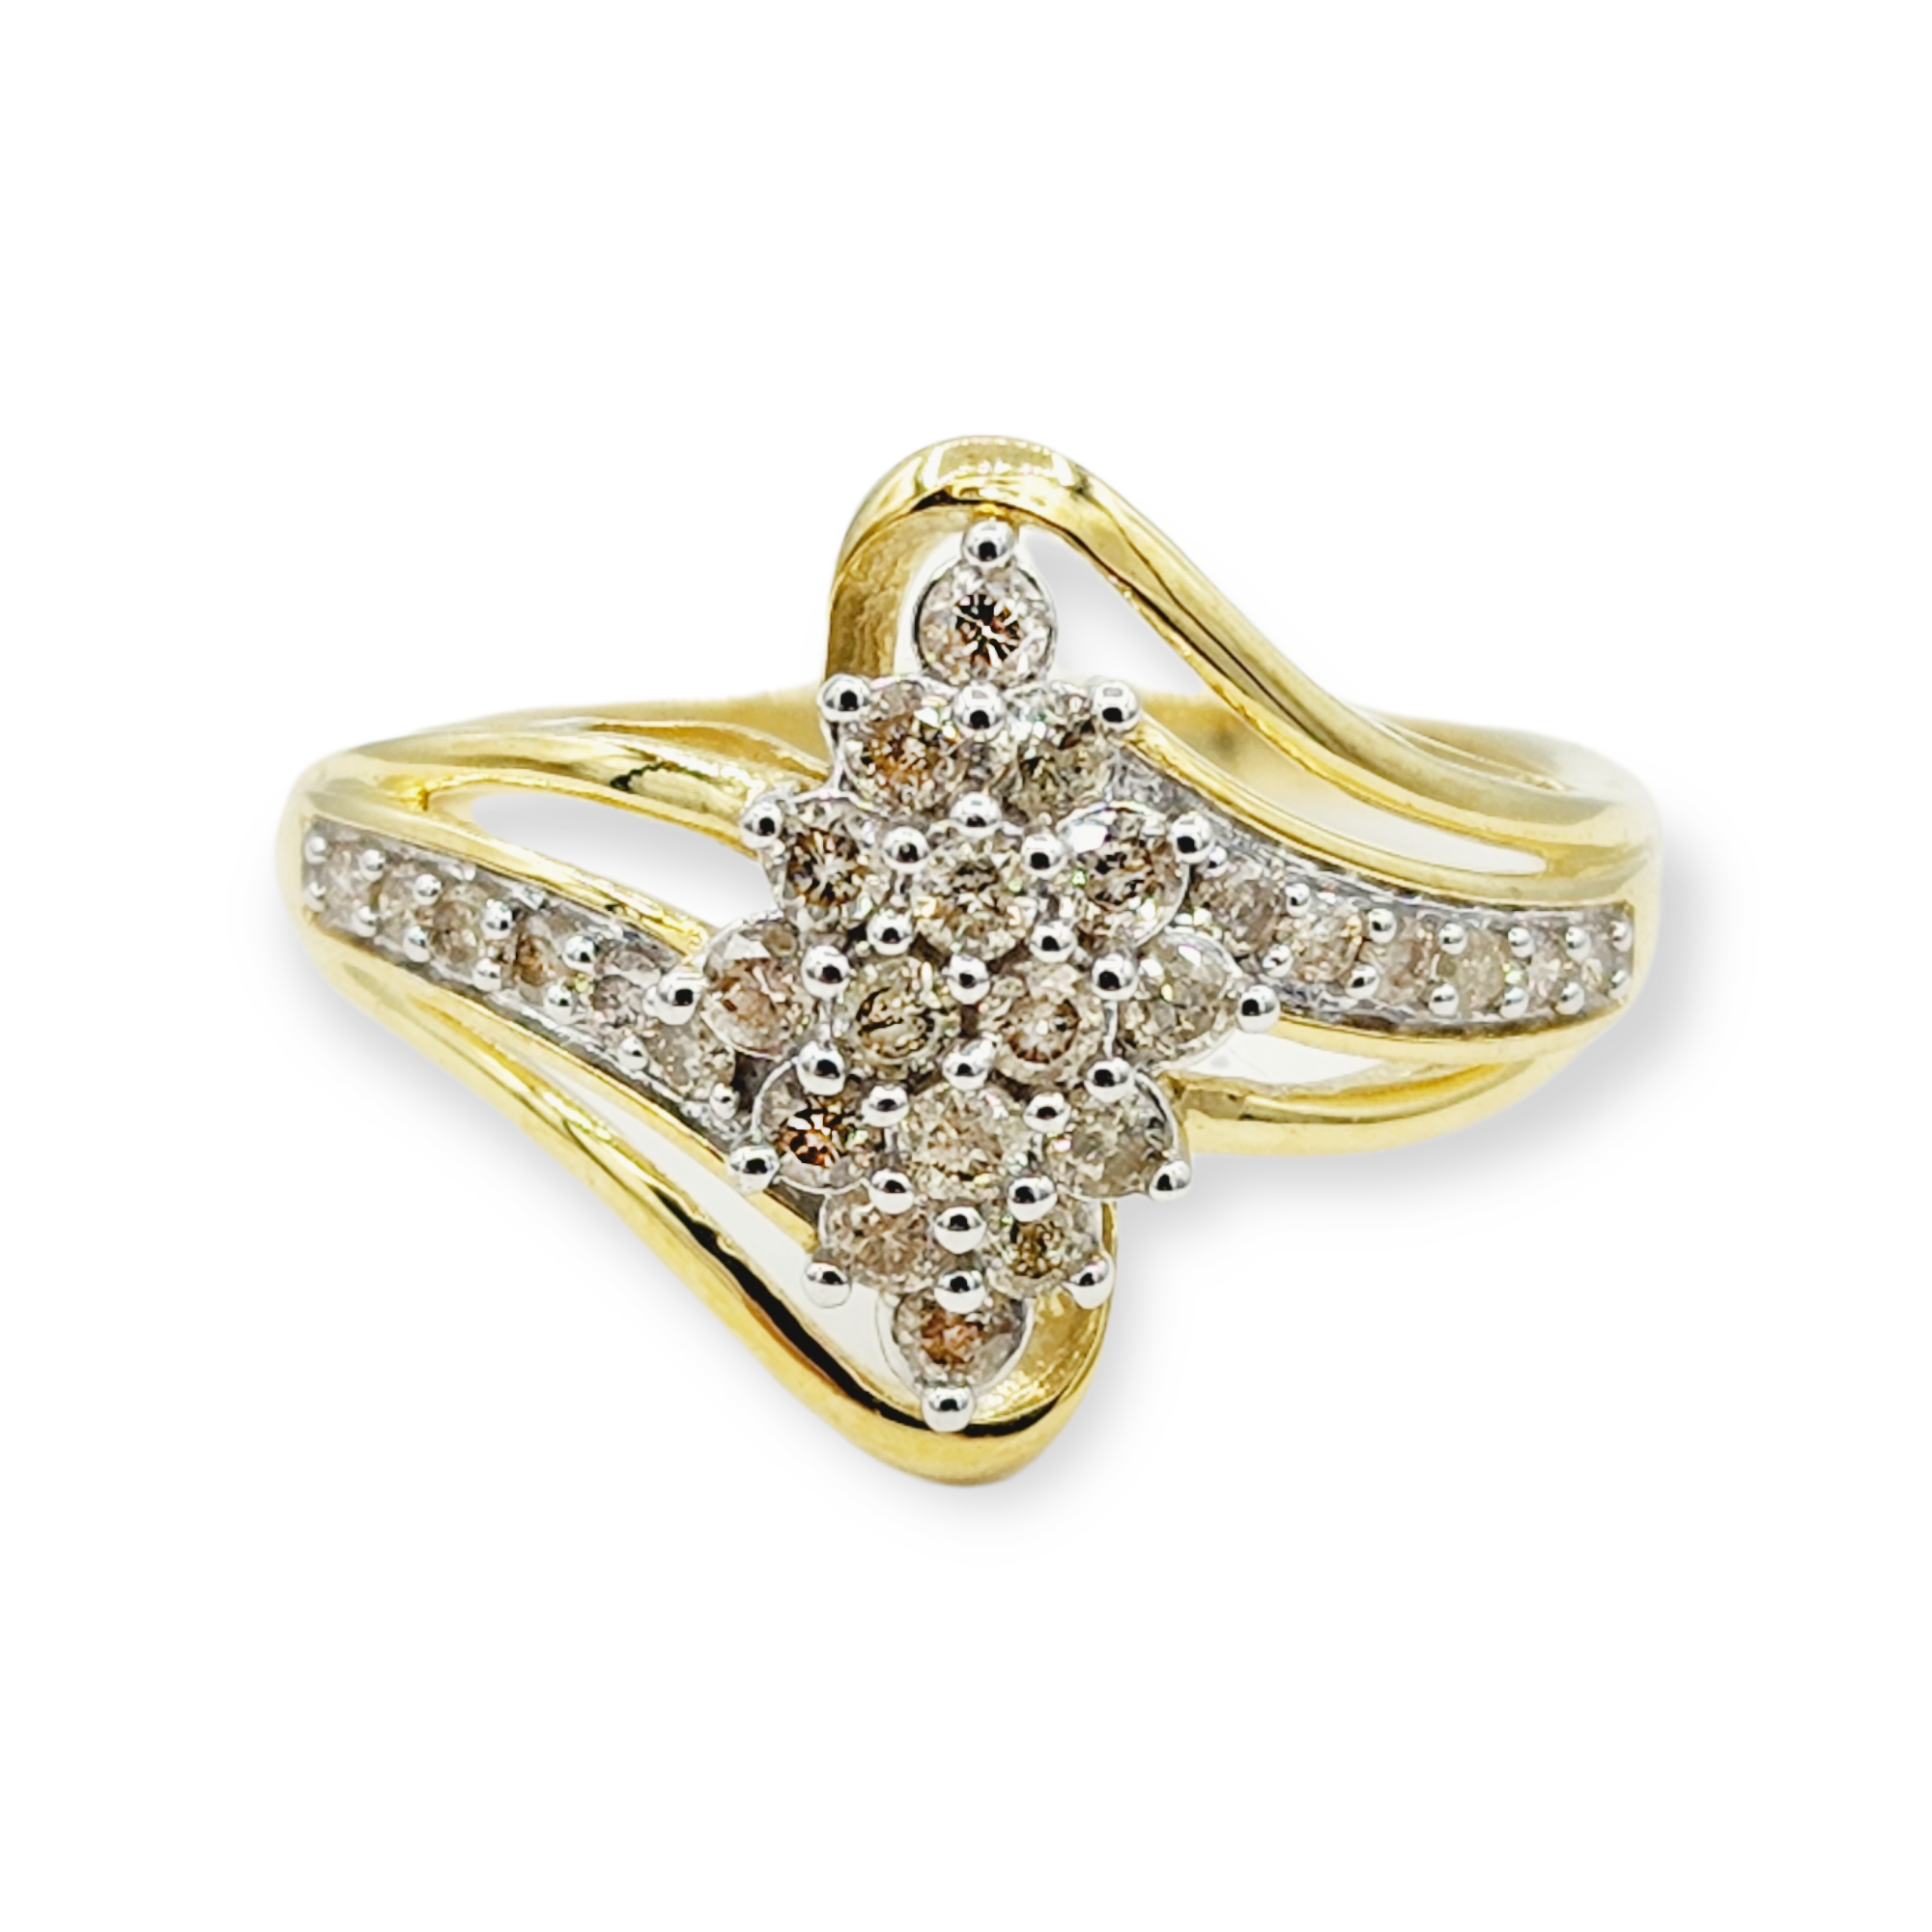 10kt Yellow Gold Ring with Diamonds 0.50ct